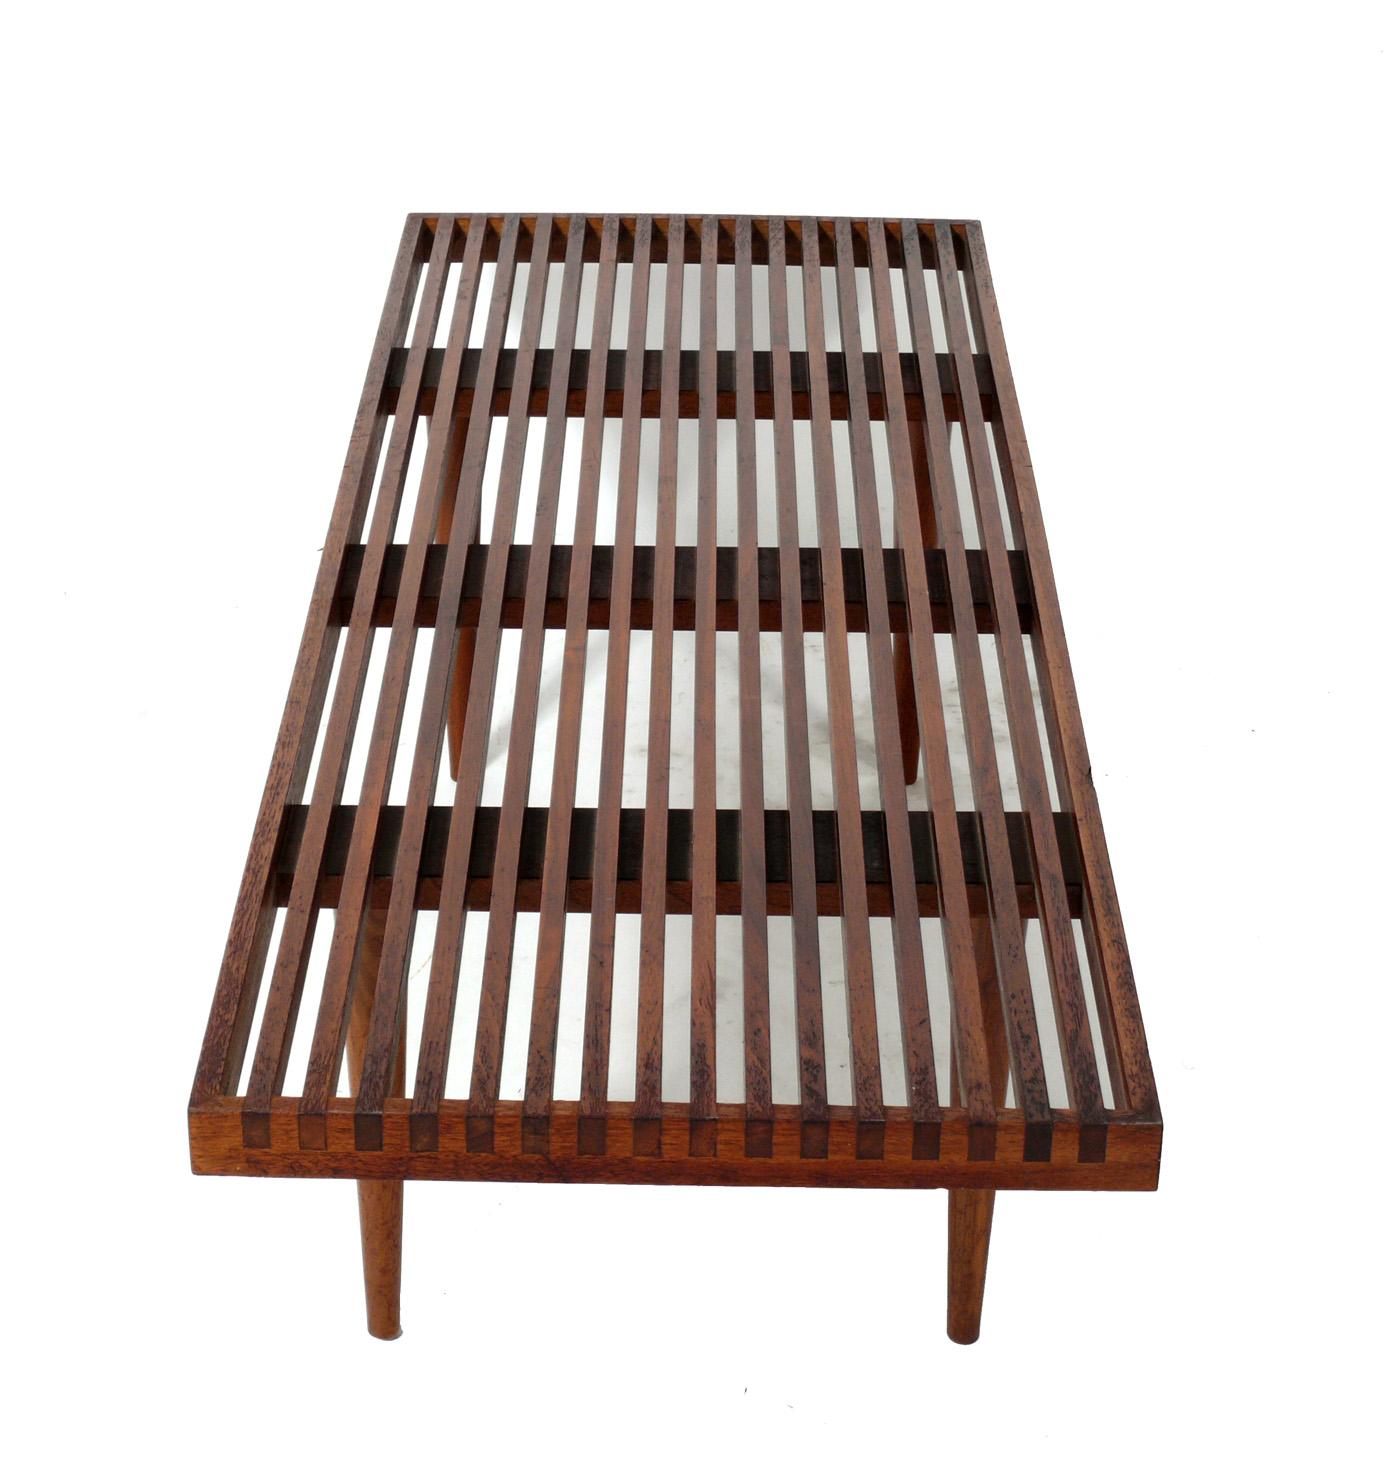 Midcentury walnut slat bench or coffee table, designed by Mel Smilow, American, circa 1950s. It has Smilow's signature joinery at the corners of the bench. It is a versatile size and can be used as a bench or coffee table. It has been cleaned and